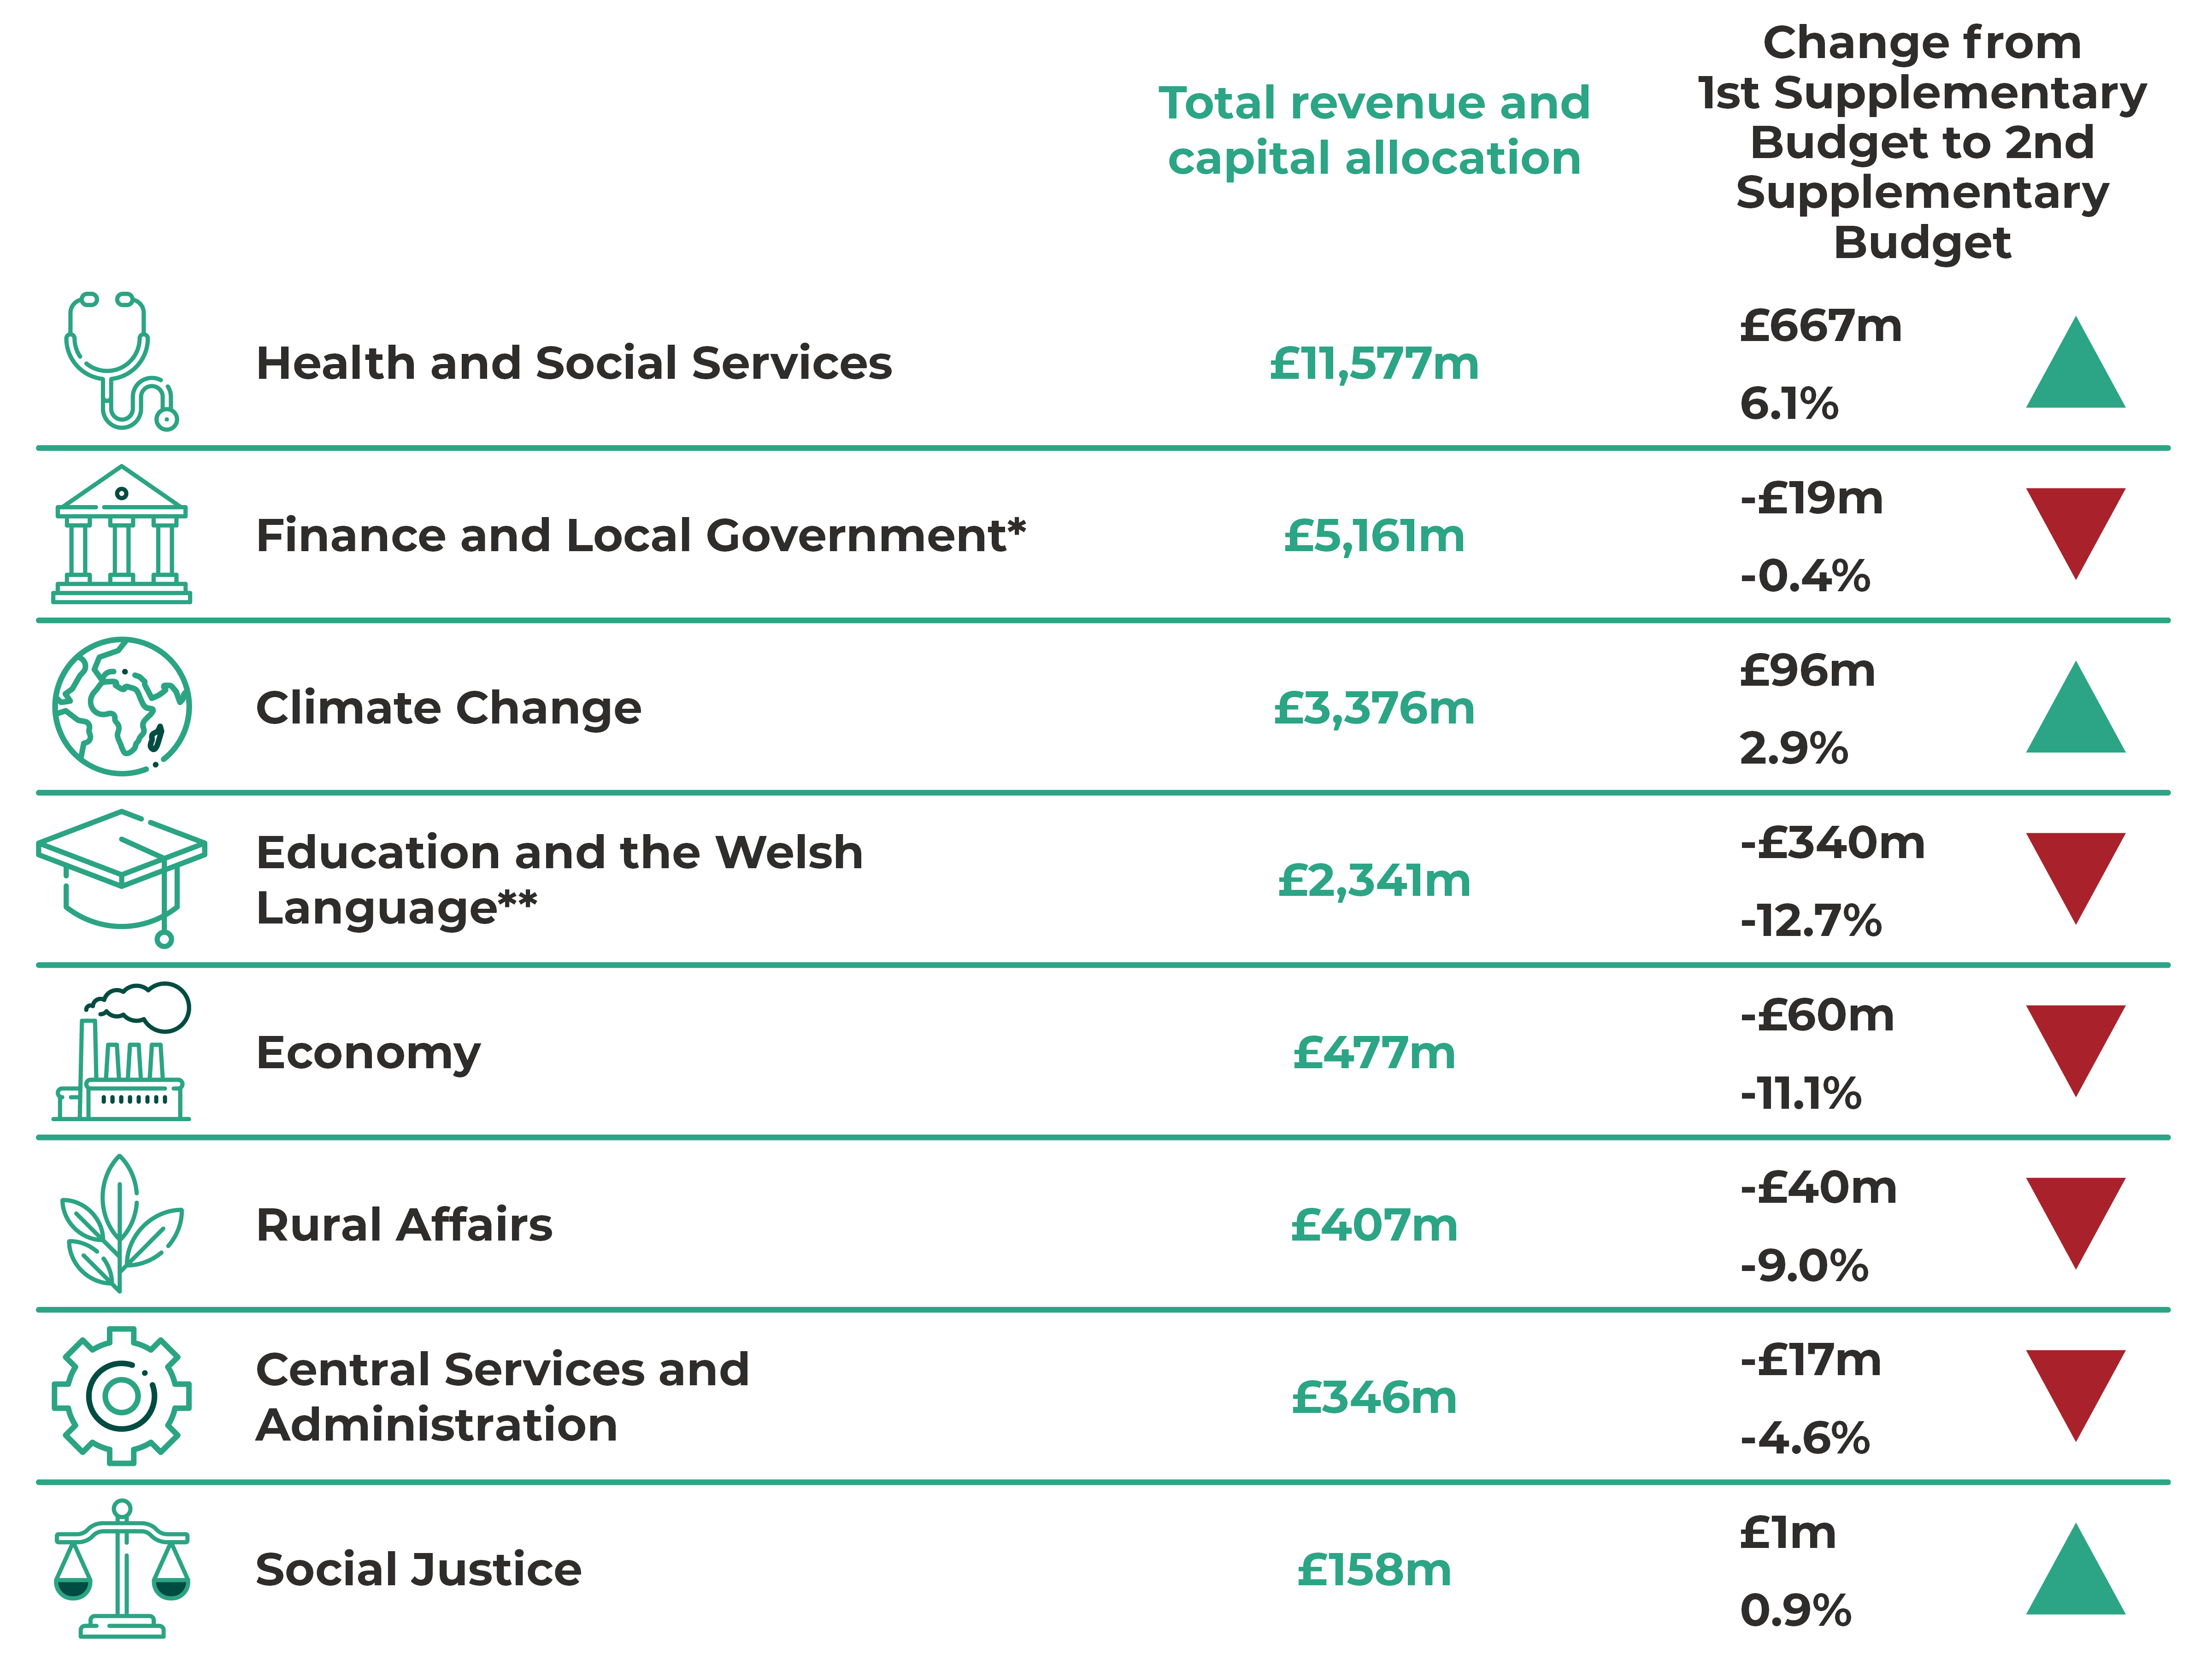 Health and Social Services £11,577m, up £667m (6.1%). Finance and Local Government £5,161m, down £19m (-0.4%). Climate Change £3,376m, up £96m (2.9%). Education and the Welsh Language £2,341m, down £340m (-12.7%). Economy £477m, down £60m (-11.1%). Rural Affairs £407m, down £40m (-9.0%). Central Services and Administration £346m, down £17m (-4.6%). Social Justice £158m, up £1m (0.9%).